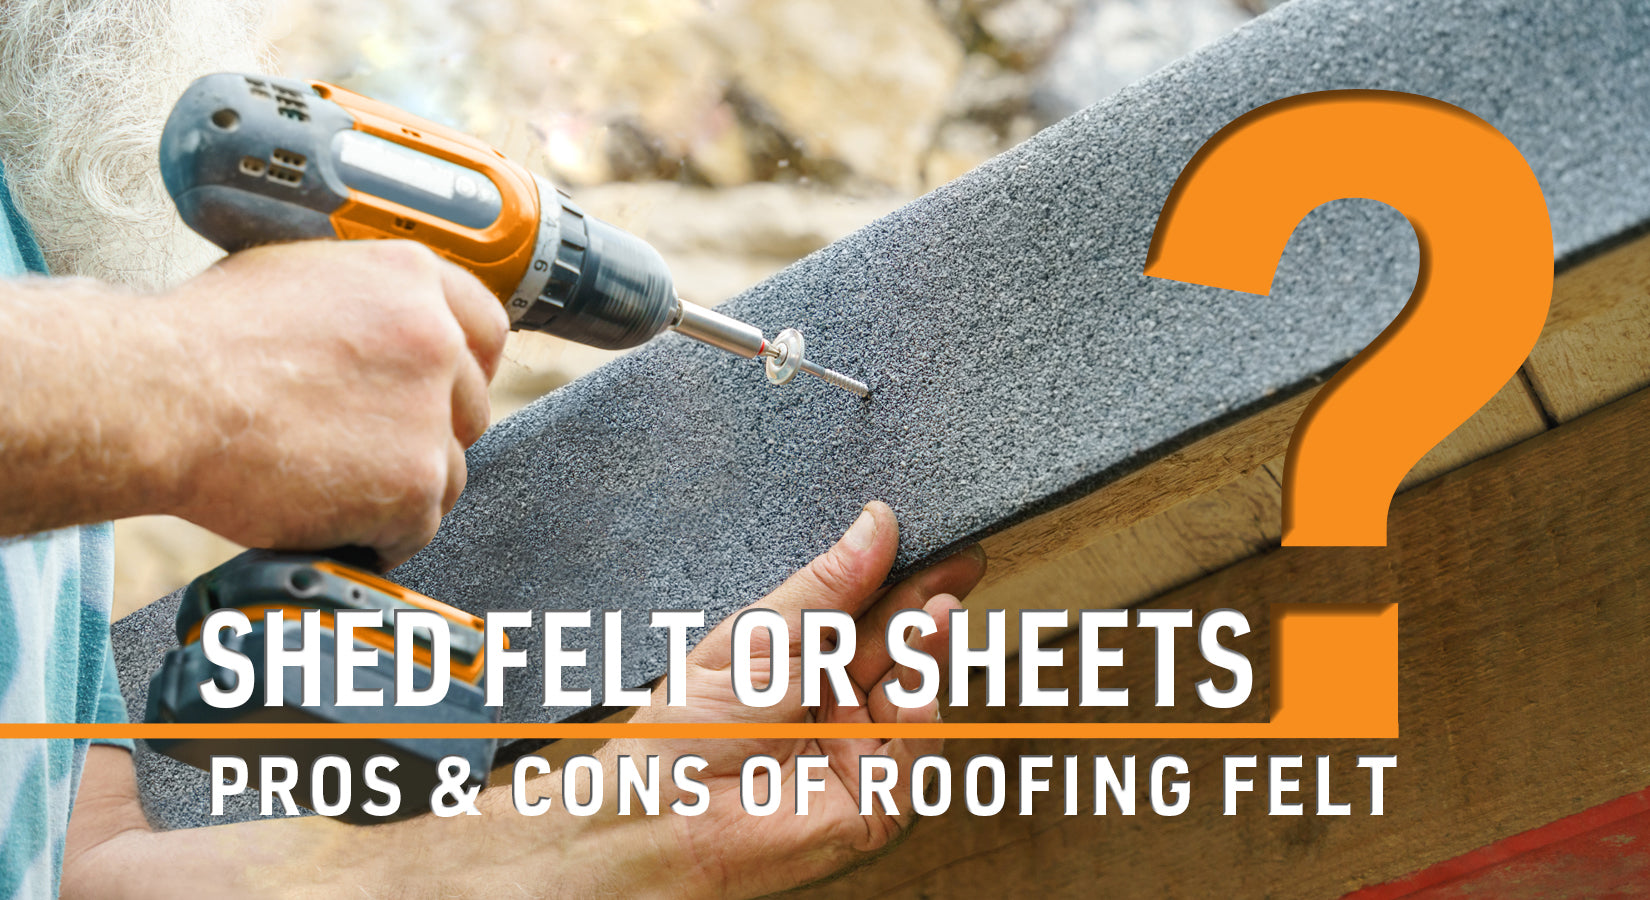 Pros And Cons Of Roofing Felt For Sheds